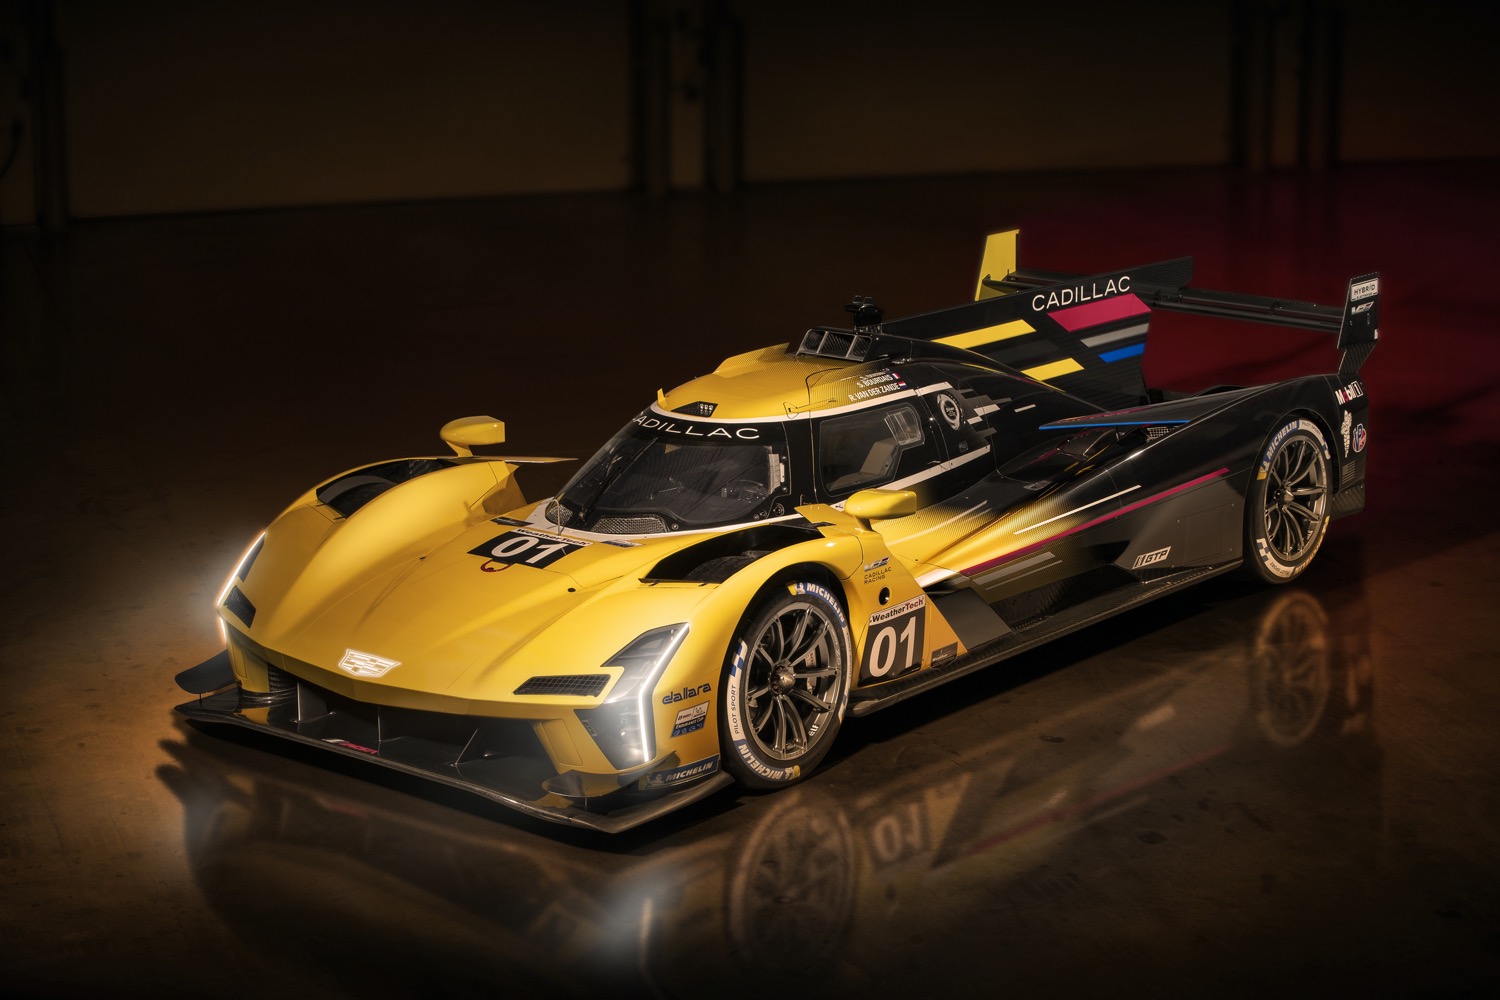 Cadillac To Field 3 VSeries.R Race Cars At 24 Hours Of LM